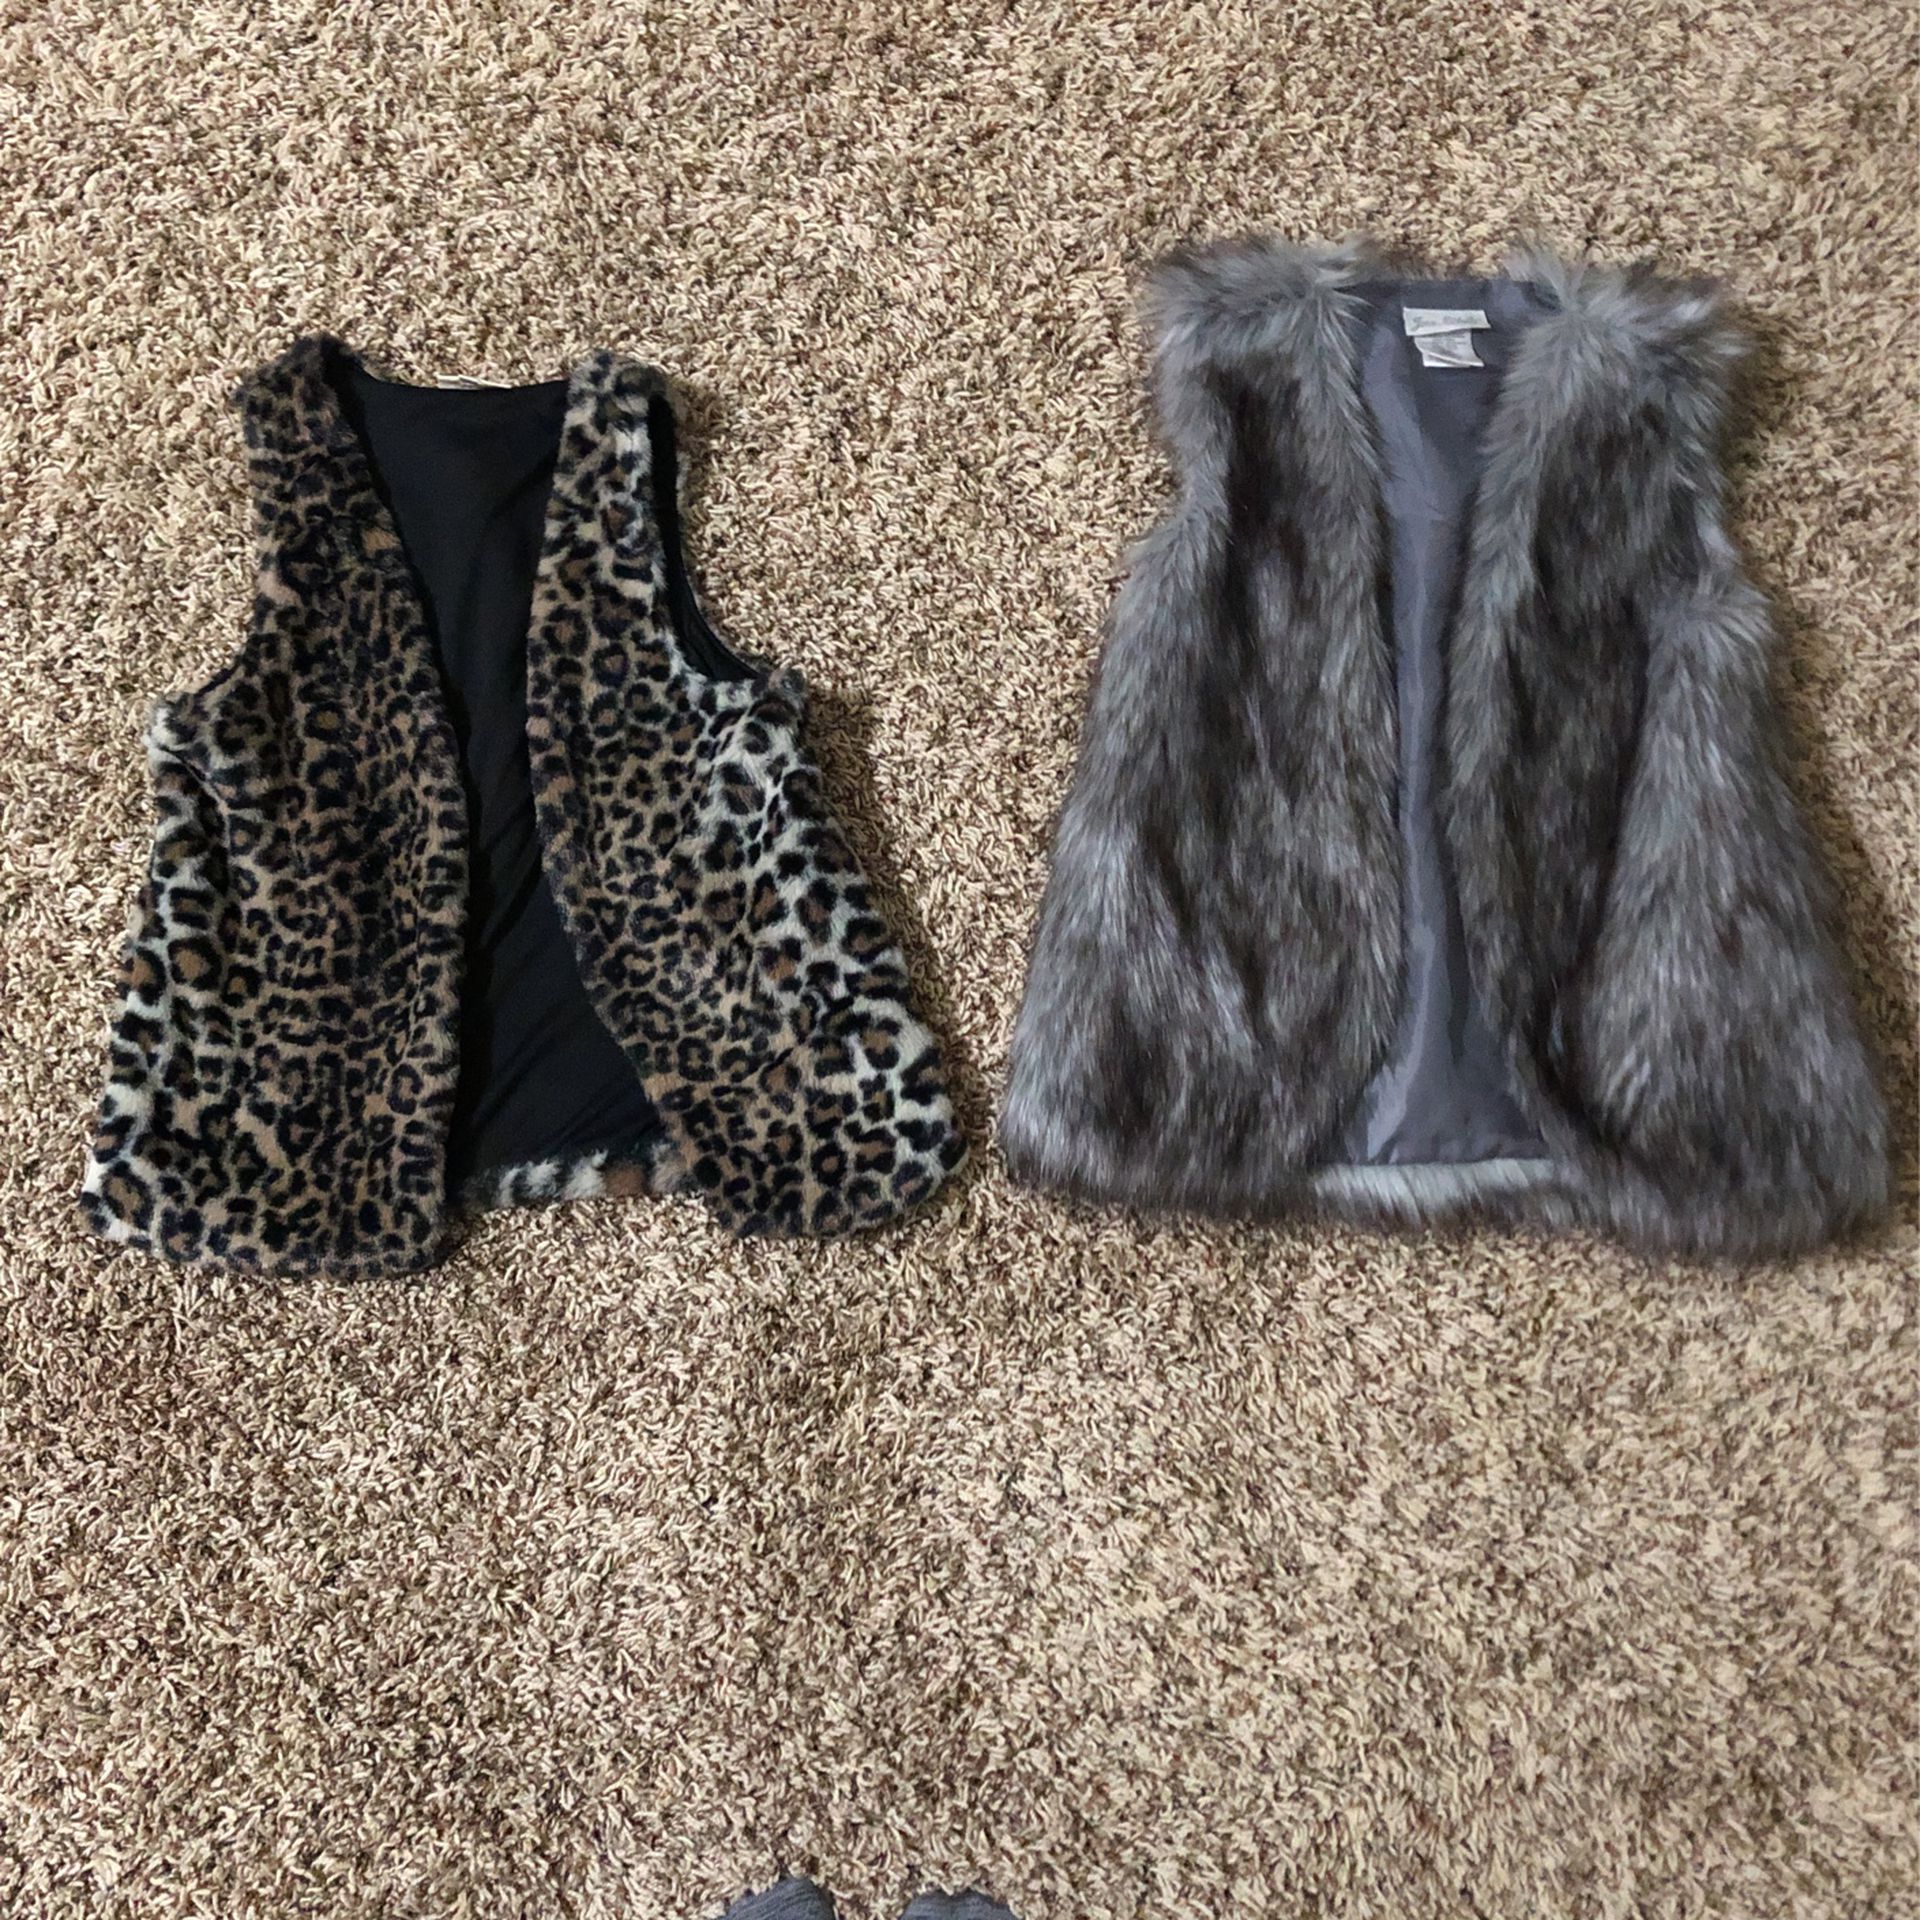 Two Fur Vests 1 Leopard Pattern The Other Wolf Patter